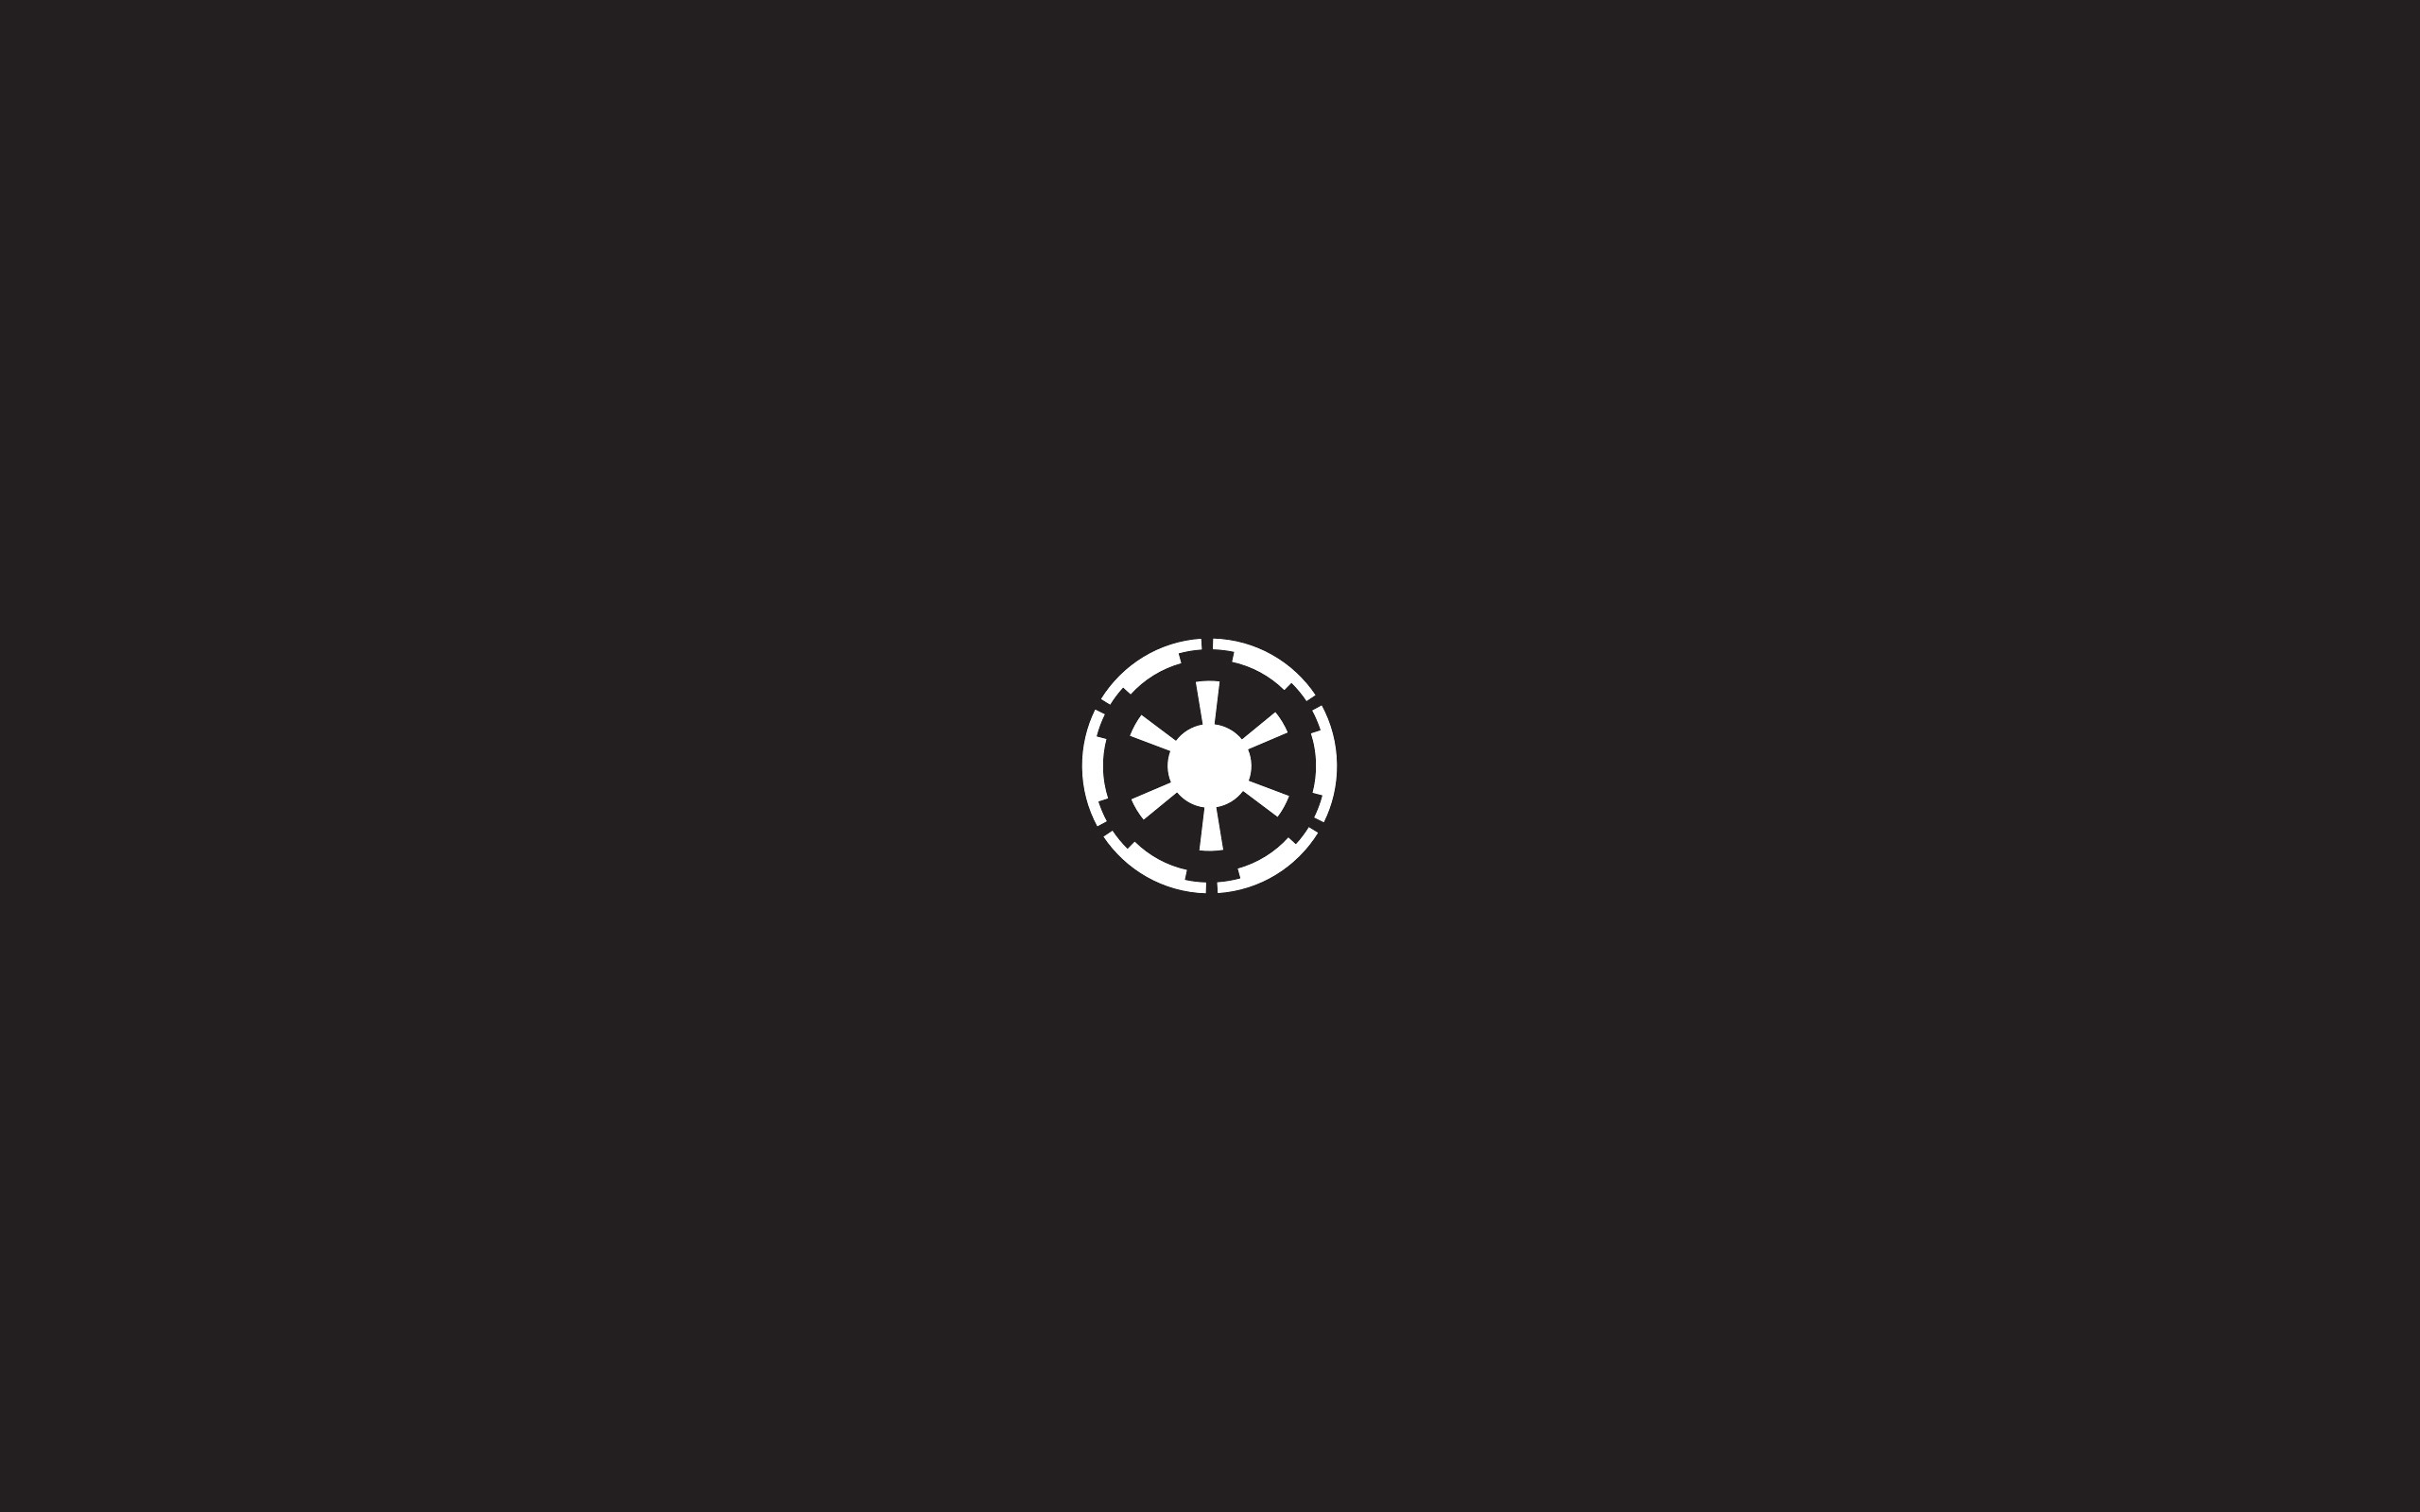 Star Wars, Minimalism Wallpapers HD / Desktop and Mobile Backgrounds.